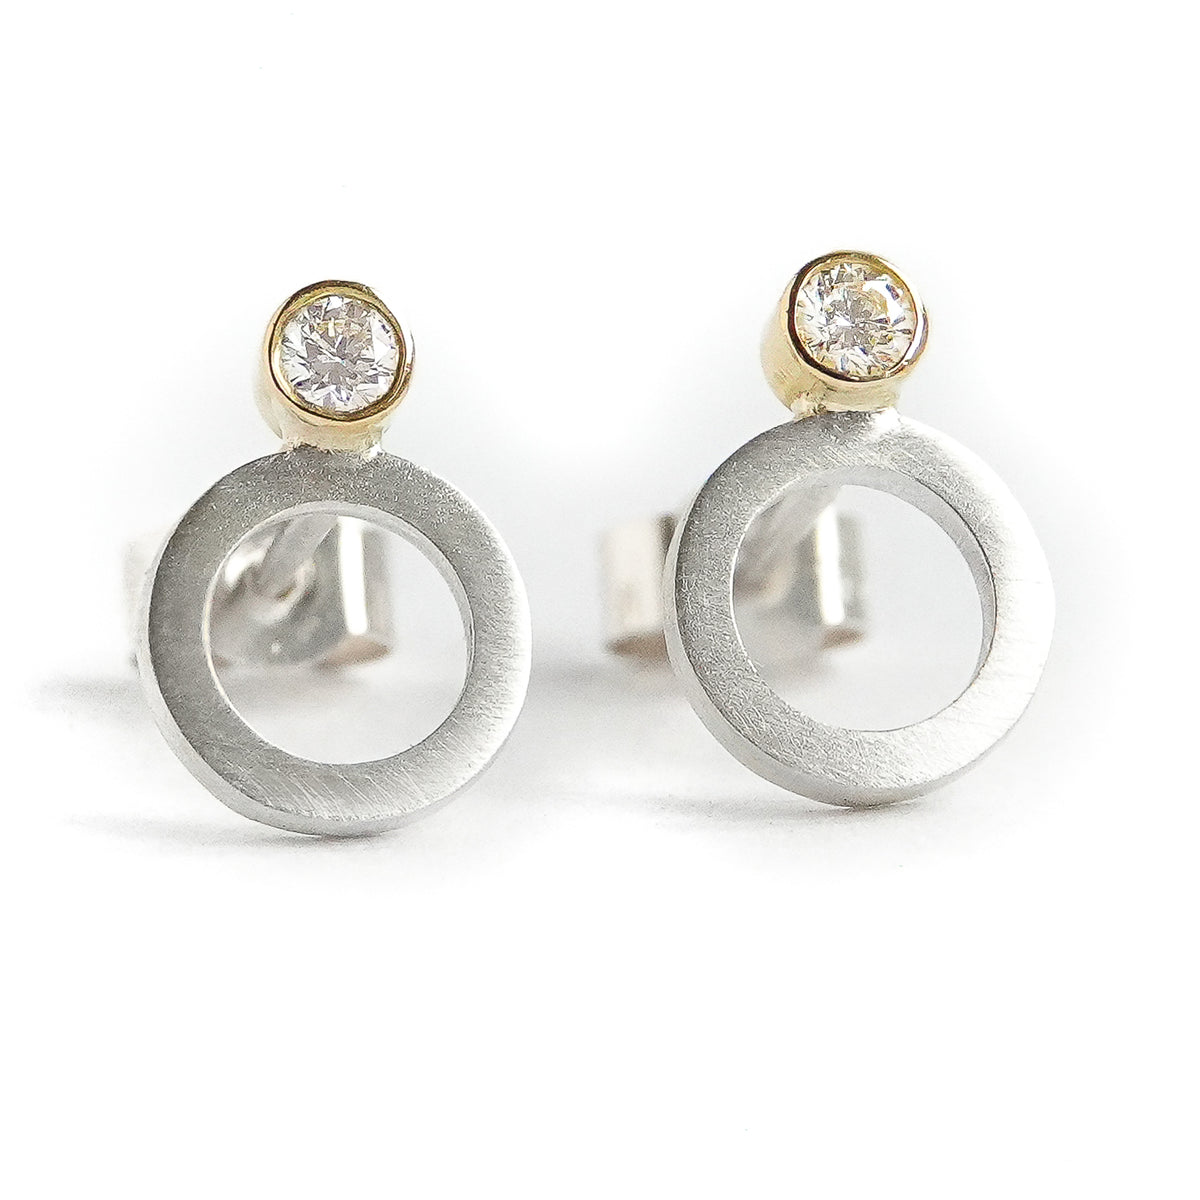 Contemporary, sparkling, silver, yellow gold and diamond stud earrings by Sue Lane